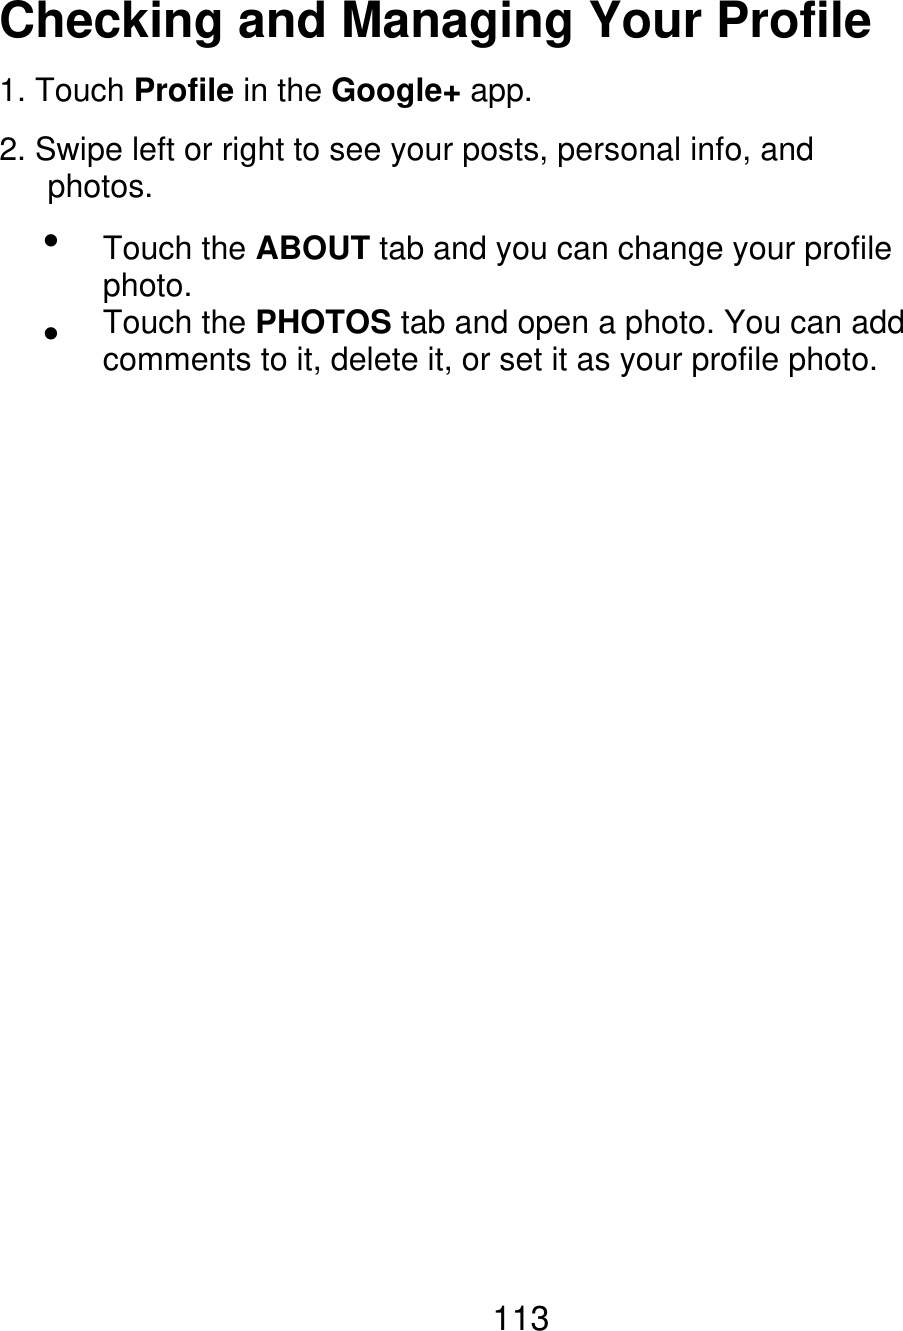 Checking and Managing Your Profile 1. Touch Profile in the Google+ app. 2. Swipe left or right to see your posts, personal info, and    photos.   Touch the ABOUT tab and you can change your profile photo. Touch the PHOTOS tab and open a photo. You can add comments to it, delete it, or set it as your profile photo. 113 